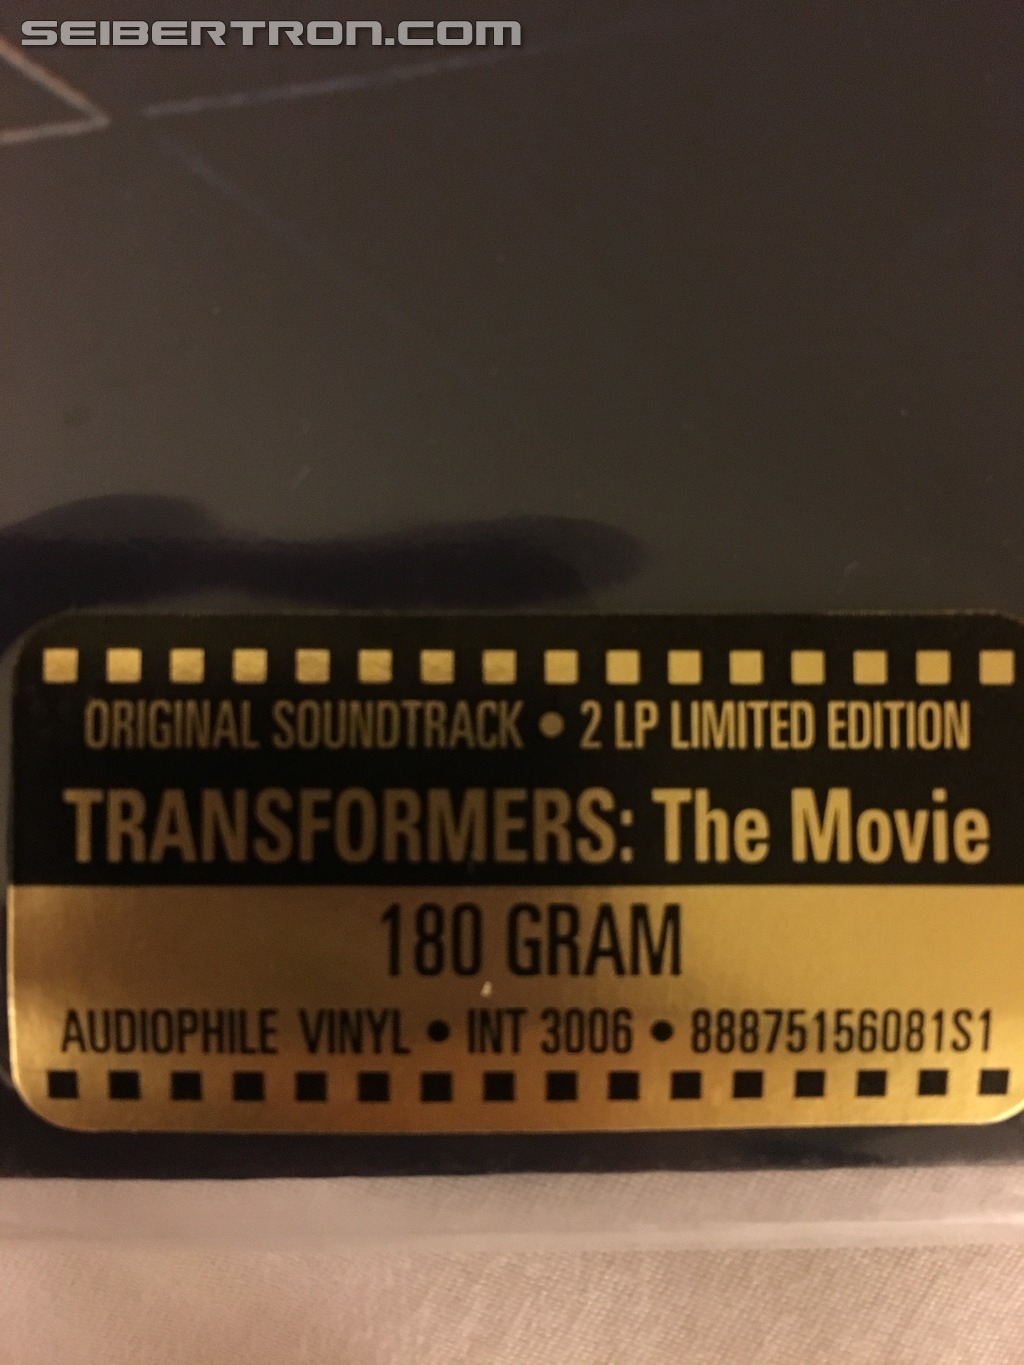 Transformers News: #Botcon2016 Limited Transformers The Movie CDs available at Concert